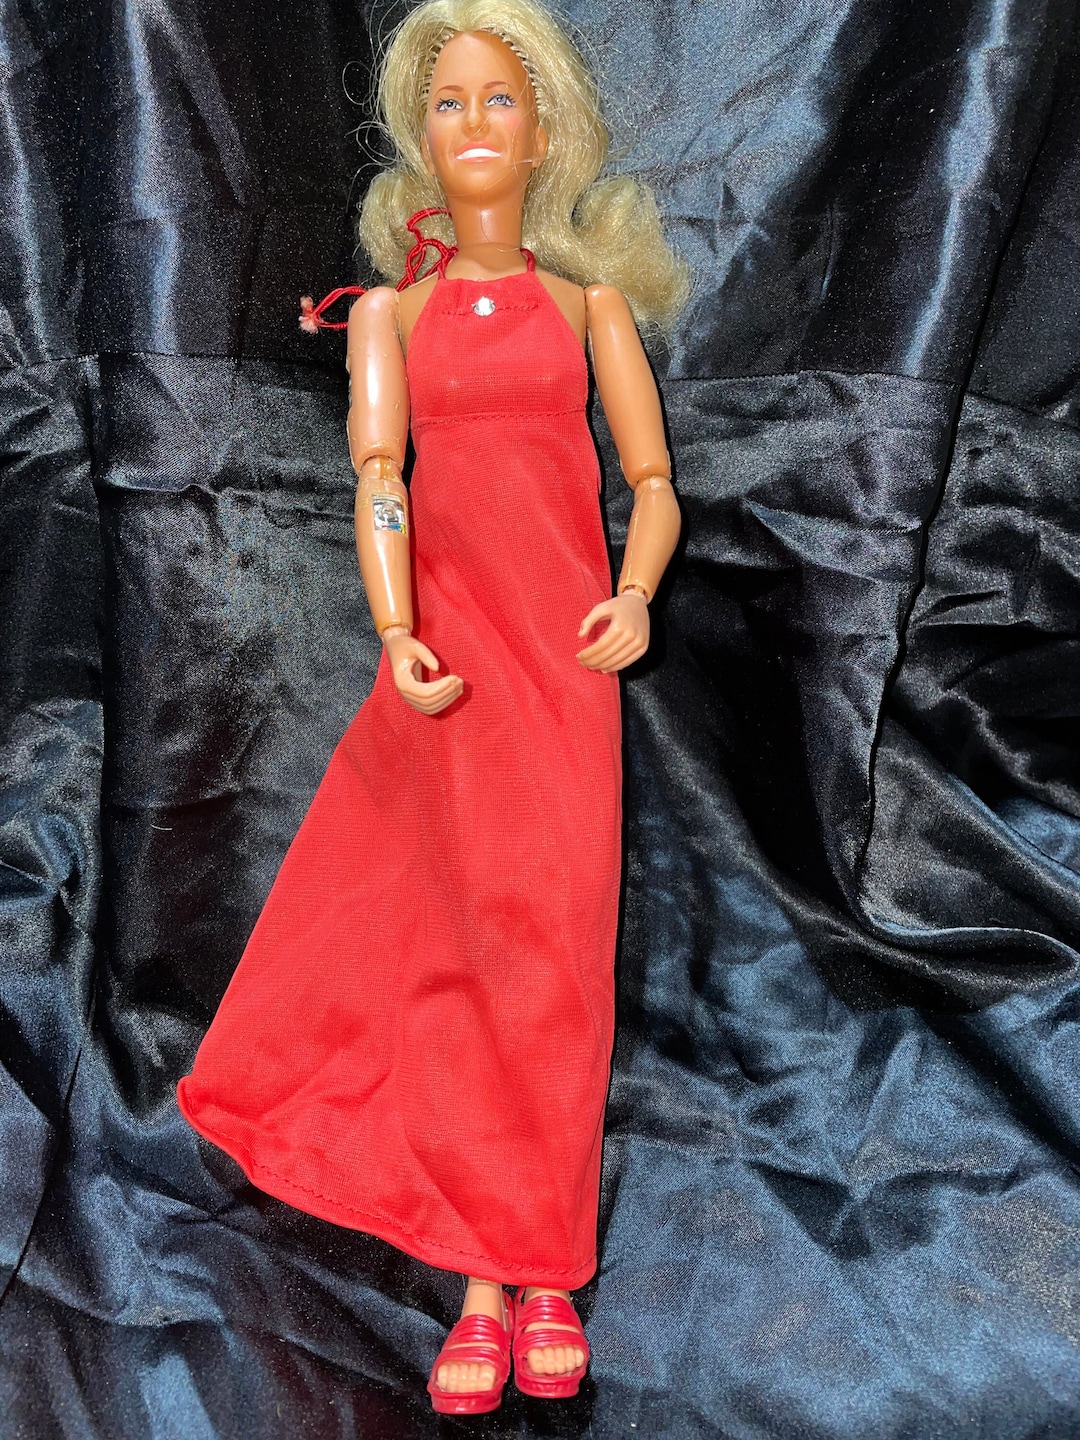 1977 Jaime Sommers Bionic Woman Barbie Doll 13 Tall Wearing Red